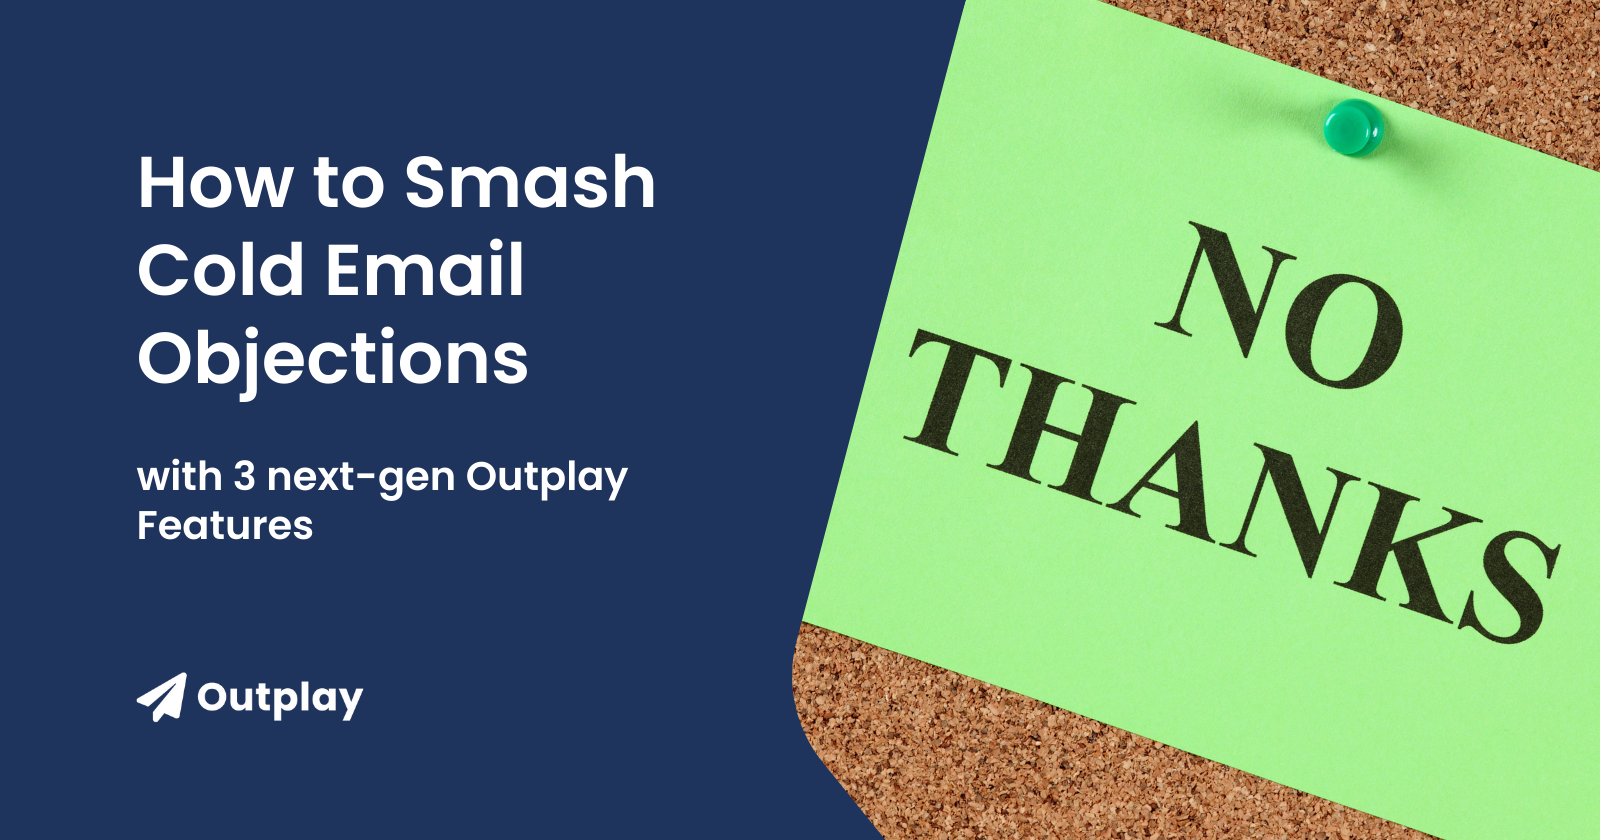 cold email objections